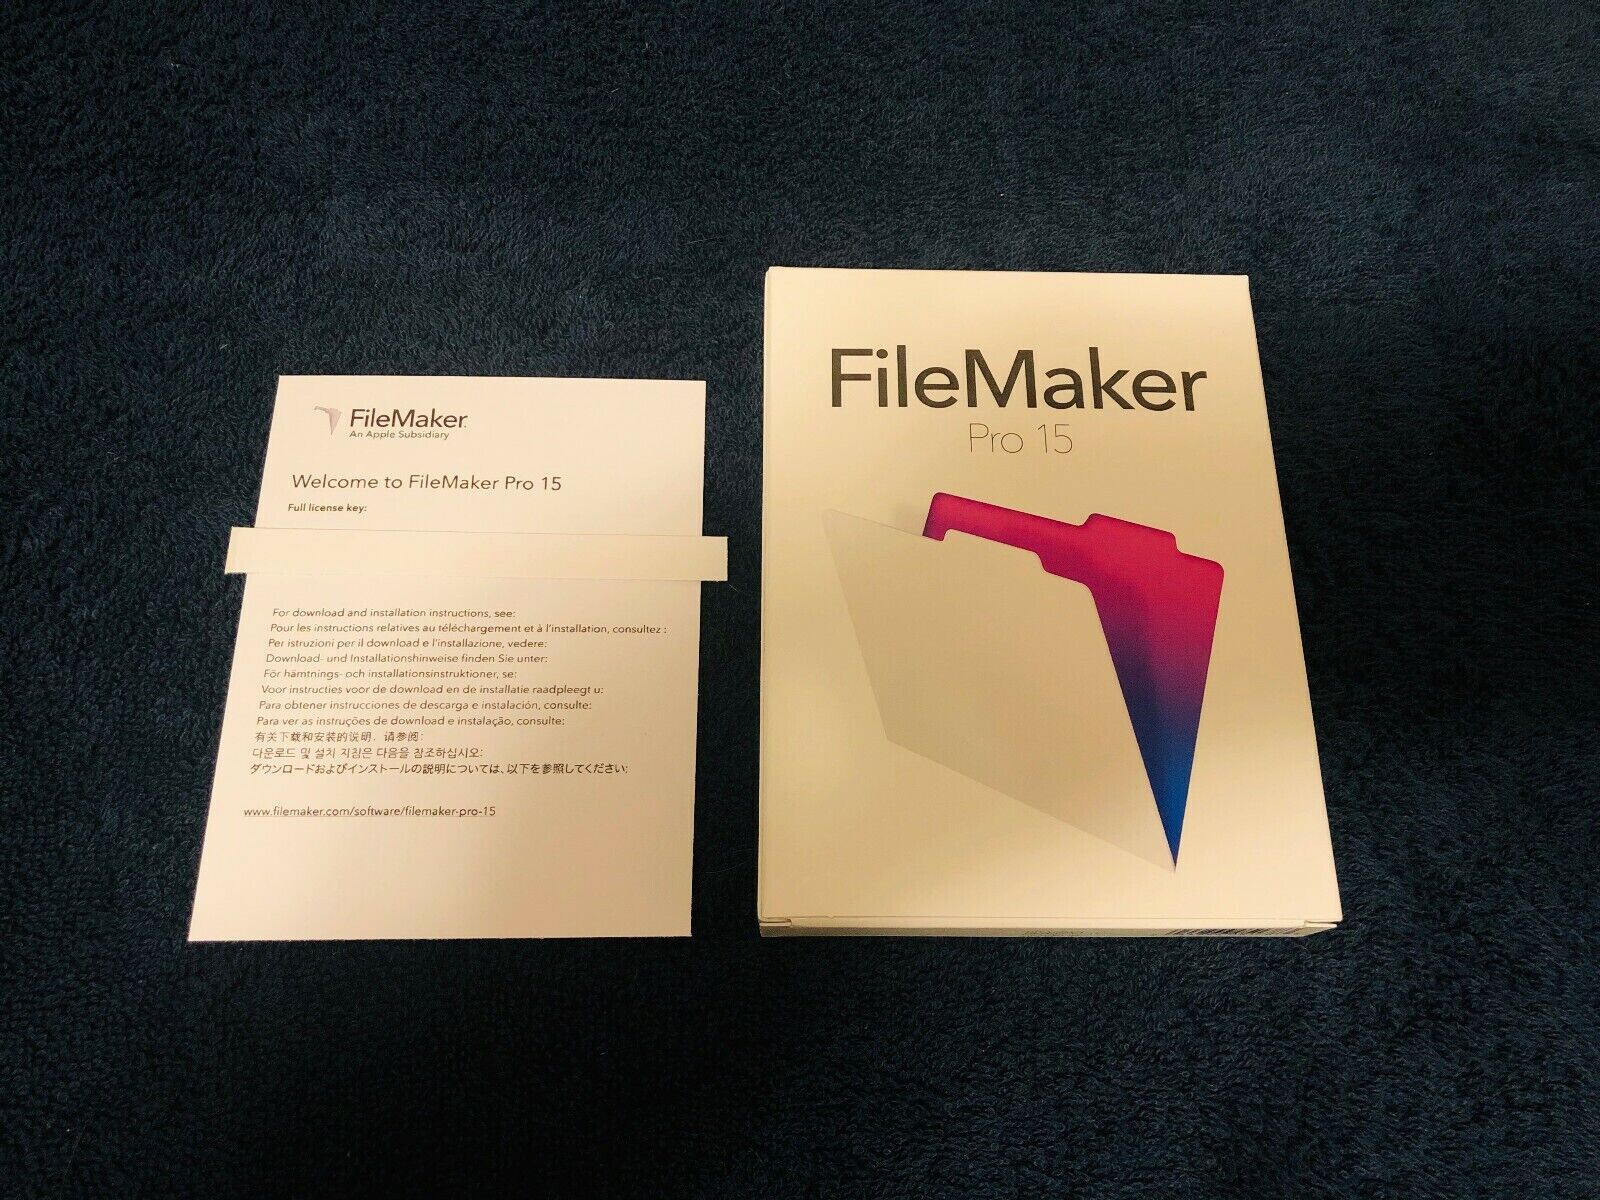 FileMaker Pro 15 Software--Full Version For Mac and Windows, 